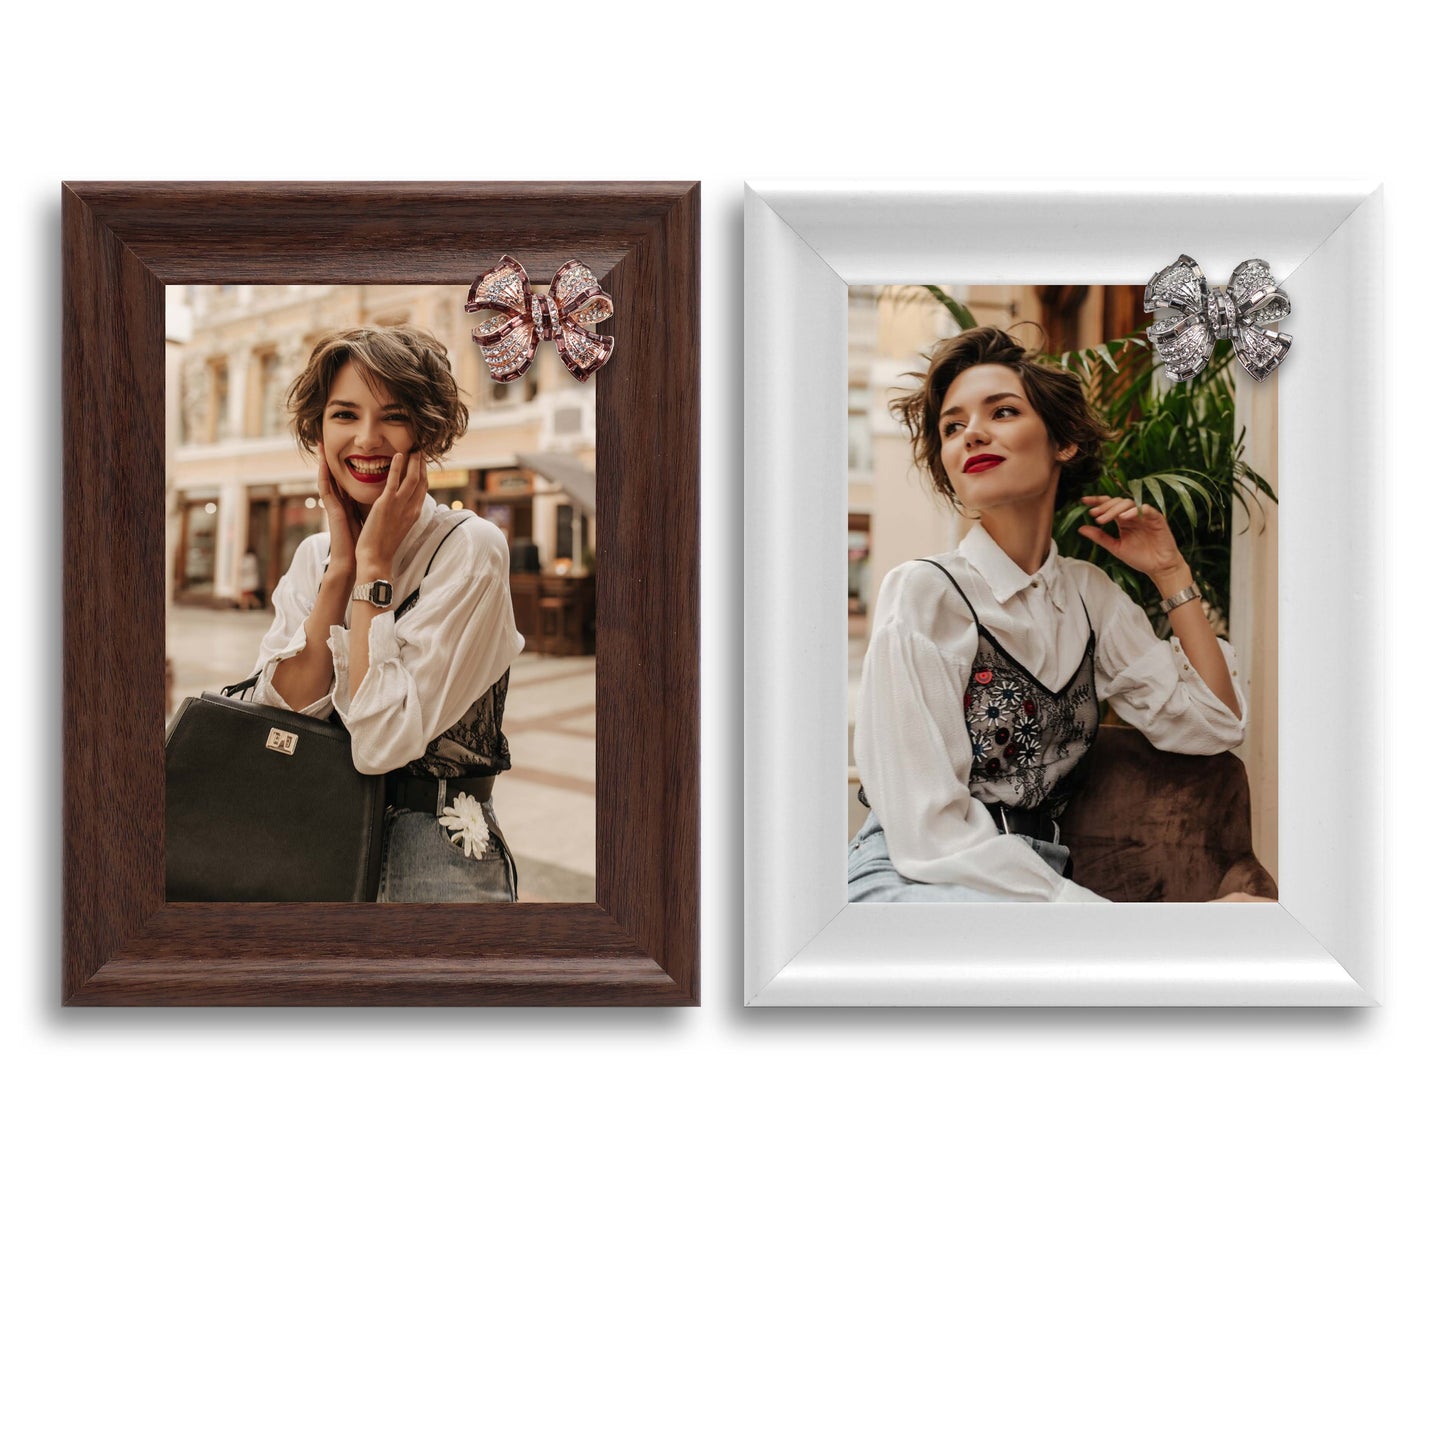 Dotride 5x7 Picture Frames with Decorations 2 Pack, Photo Frame with Detachable Bow Ornaments for Wall and Tabletop Display, Wooden Phoframe with Clear Plexiglass, White and Brown